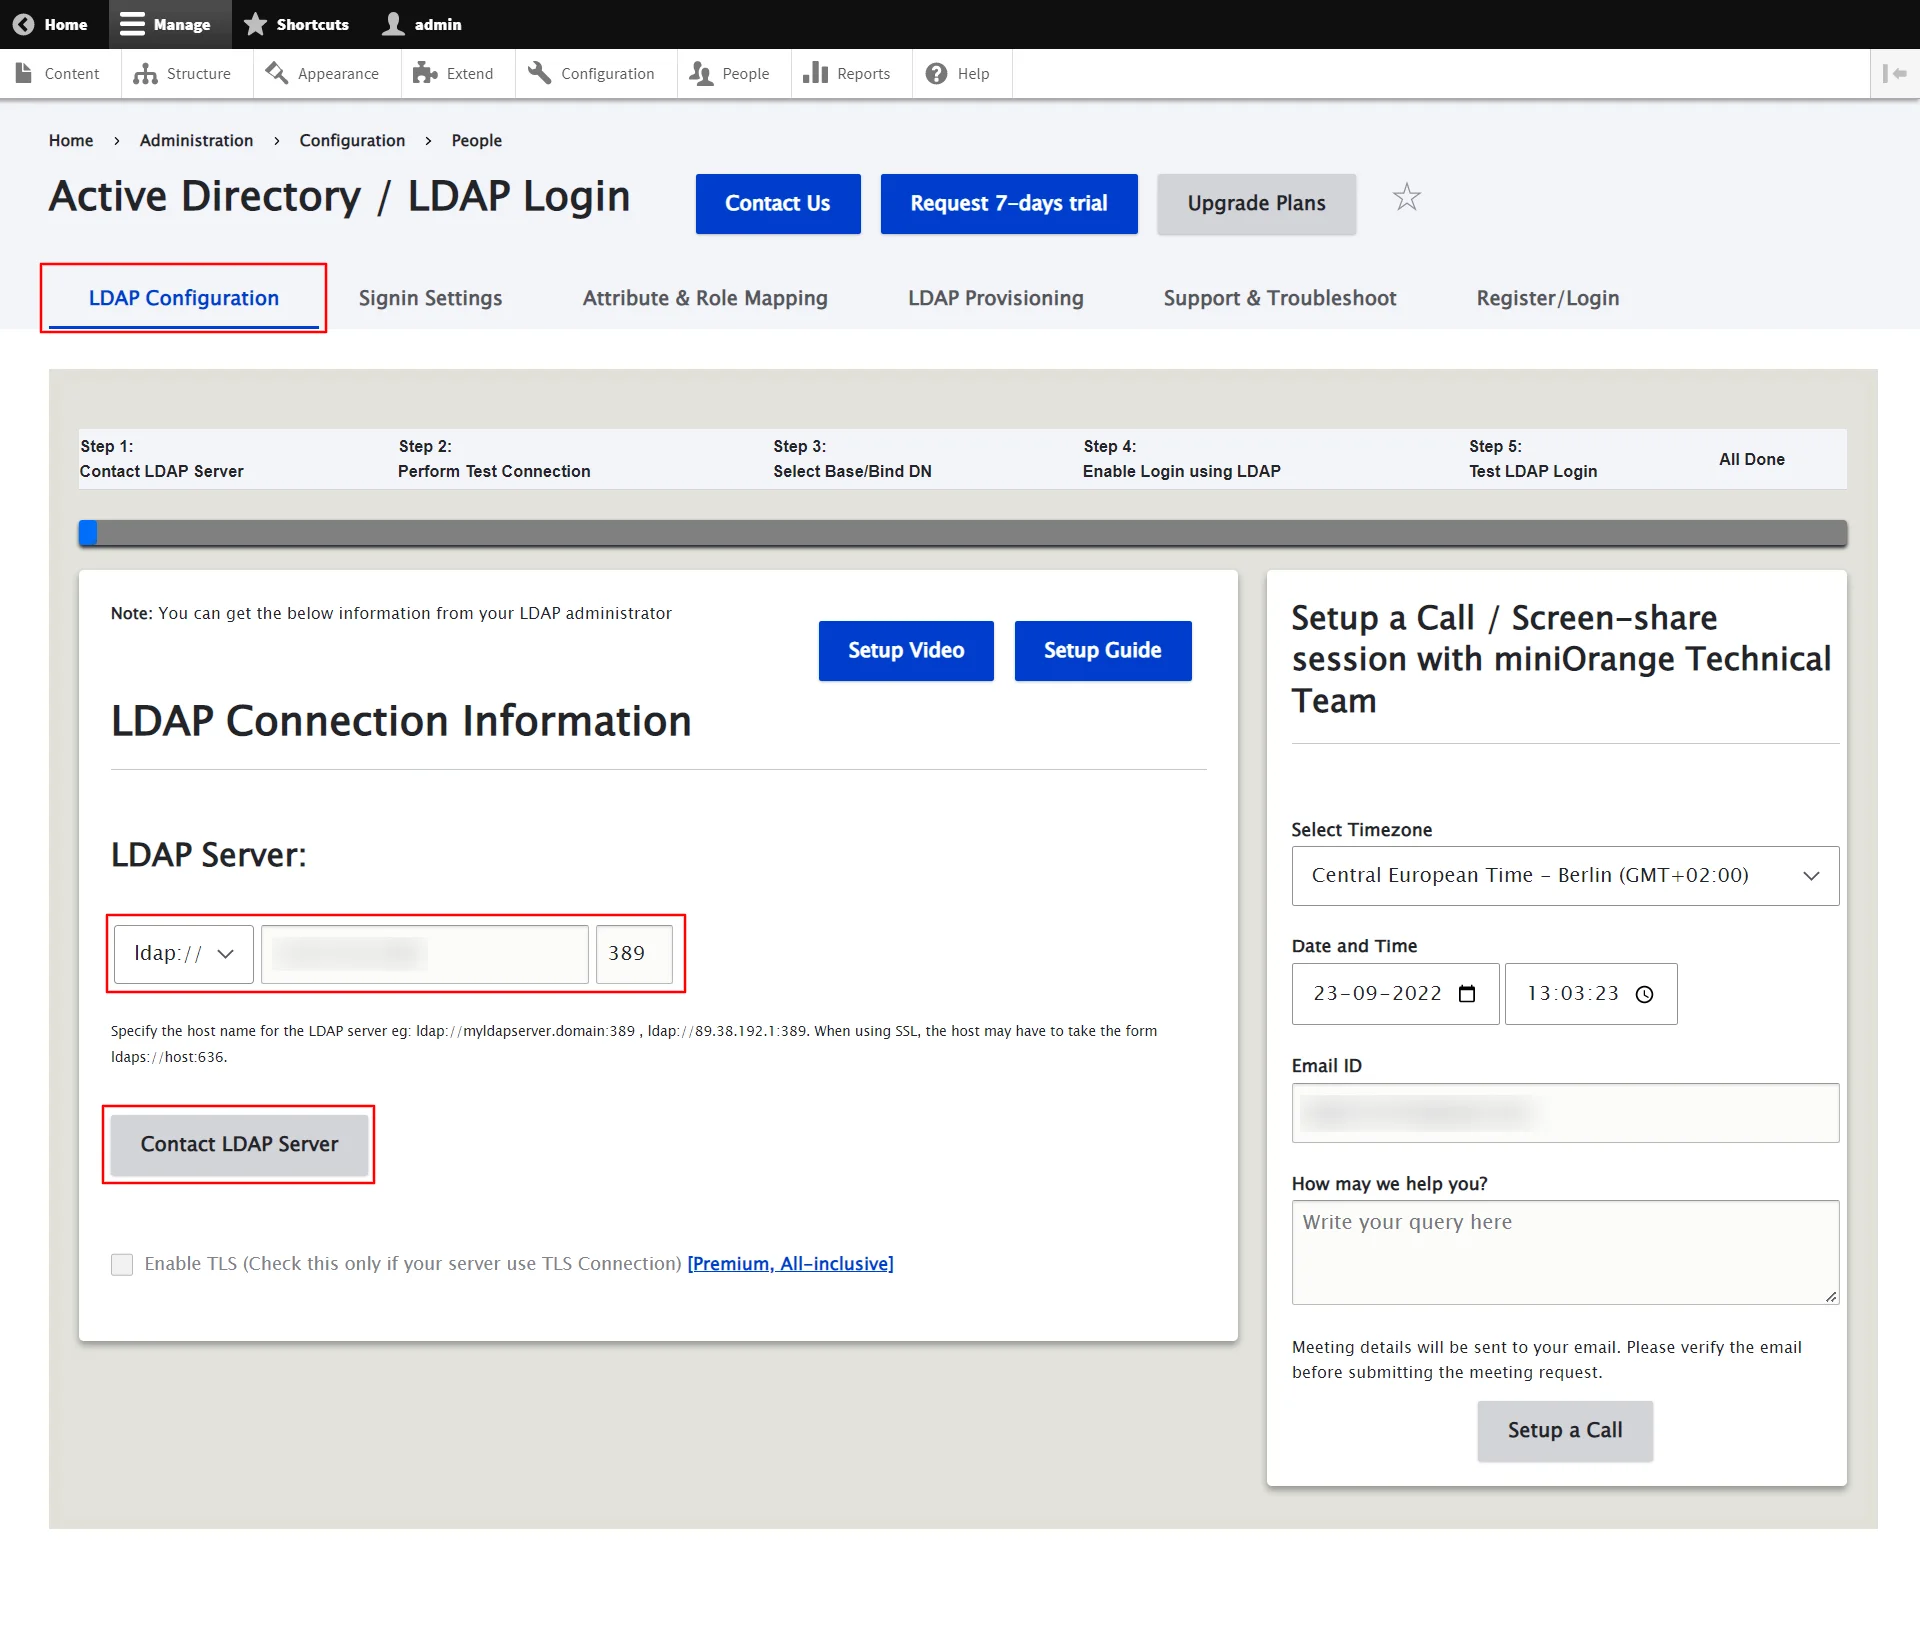 Drupal LDAP and Active Directory Connection Information Click on Contact LDAP Server